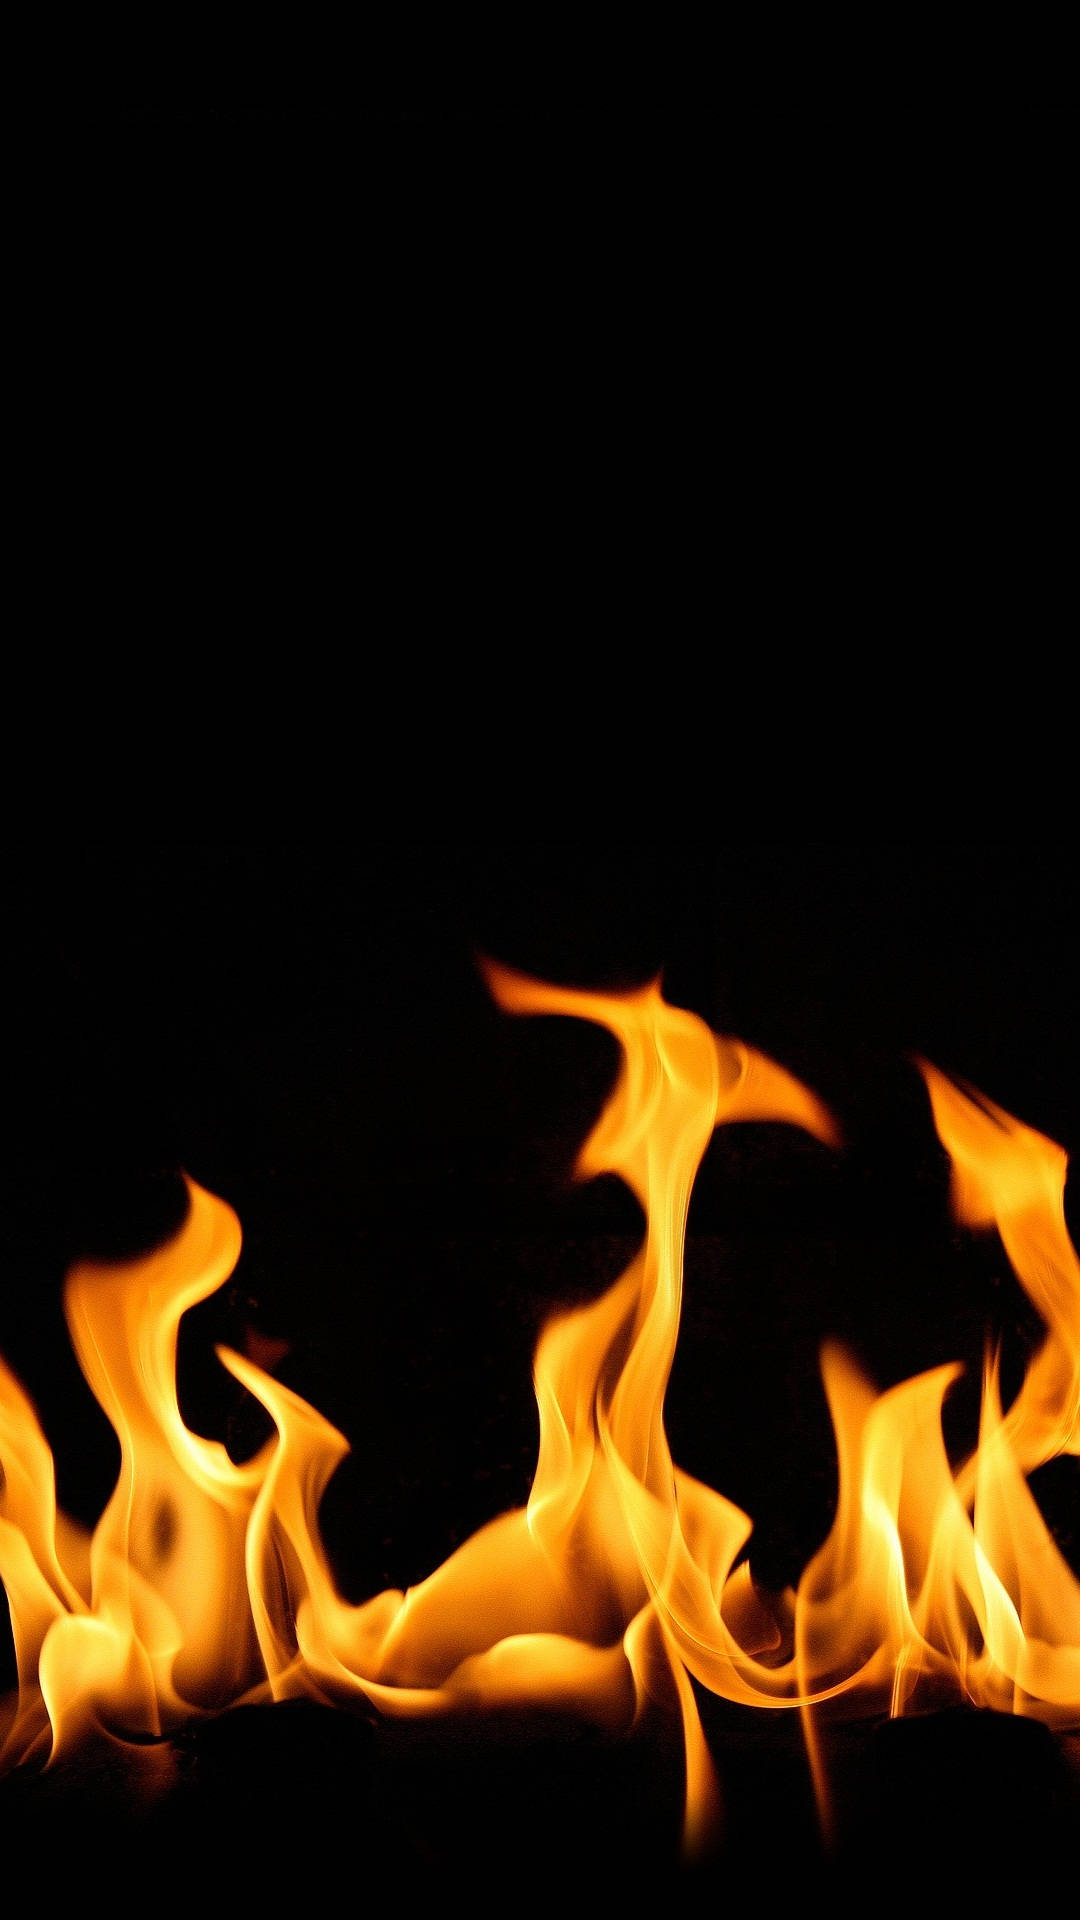 Iphone Fire Black Background Wallpaper